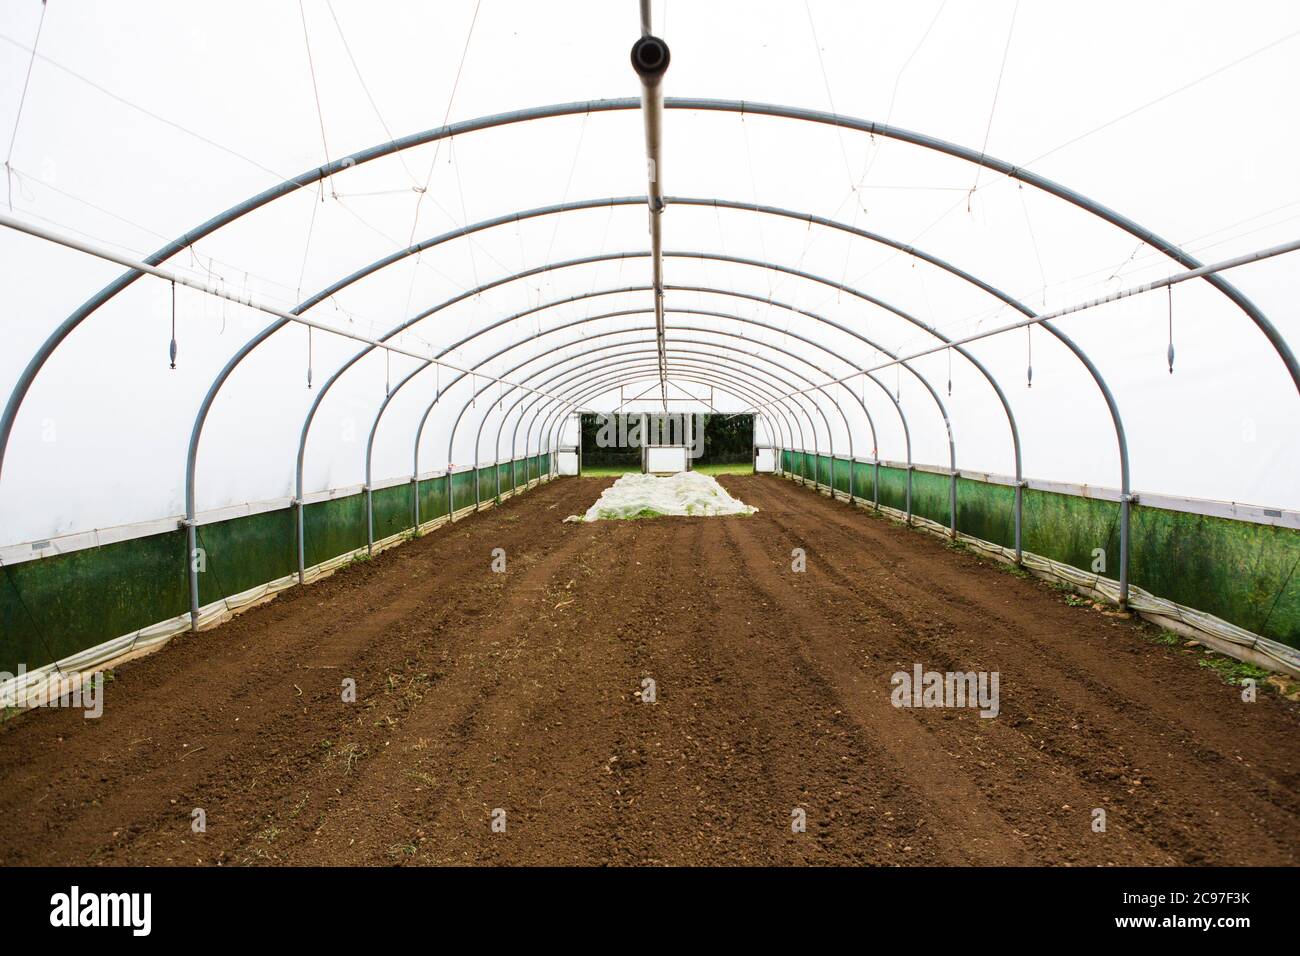 Poly tunnel or artifical green house on a farm growing crops that reauire hot temperatures. Stock Photo